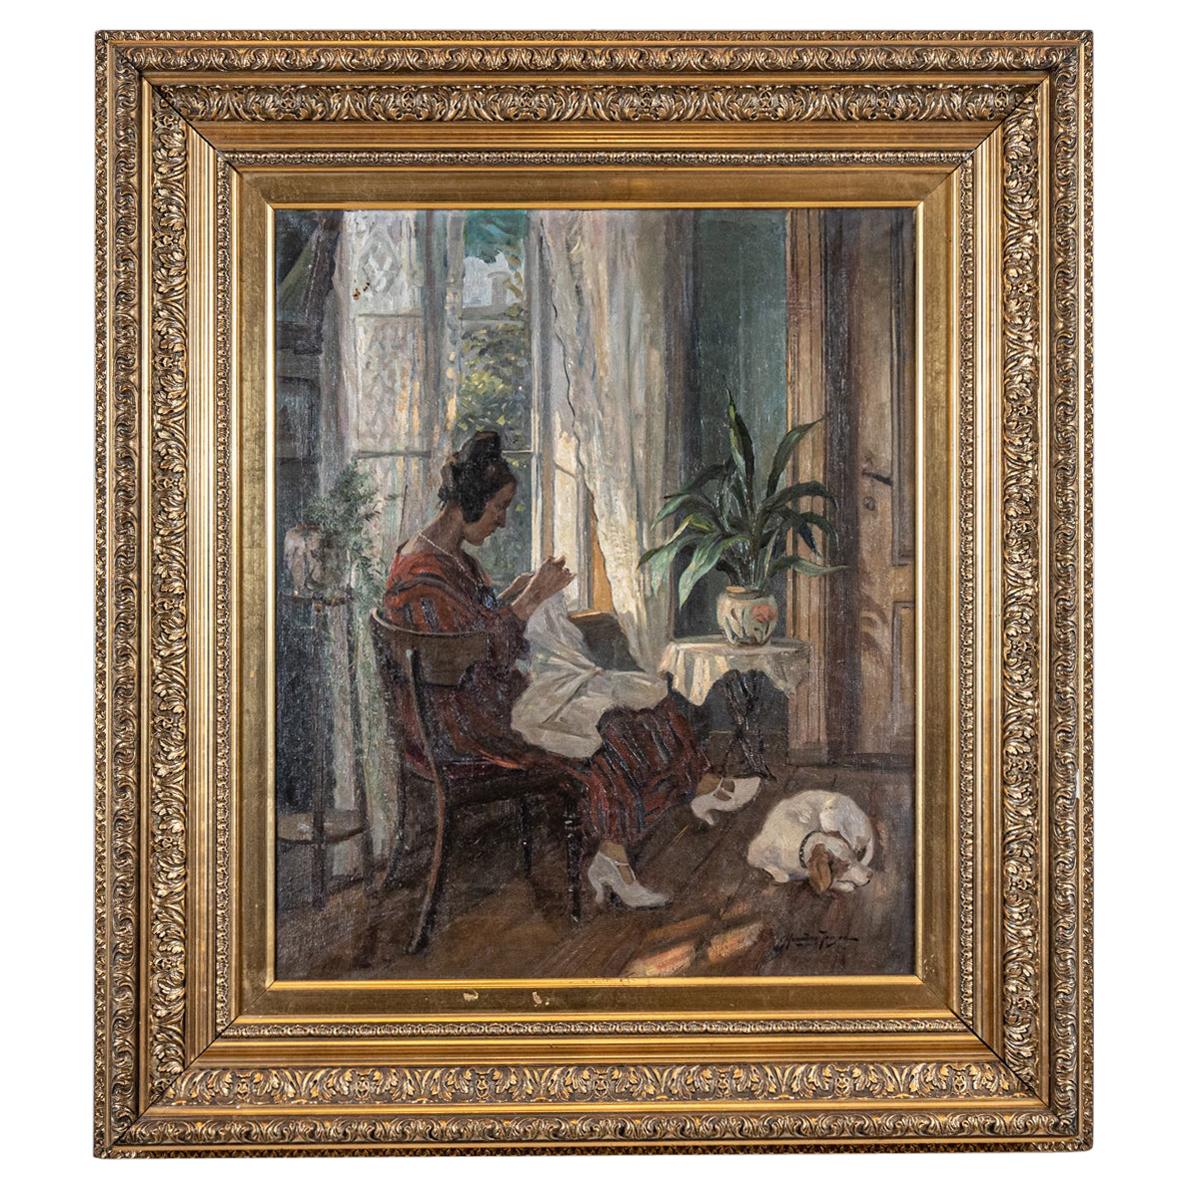 1930s Danish Oil Painting on Canvas of a Woman with a Dog by Carl Horning-Jensen